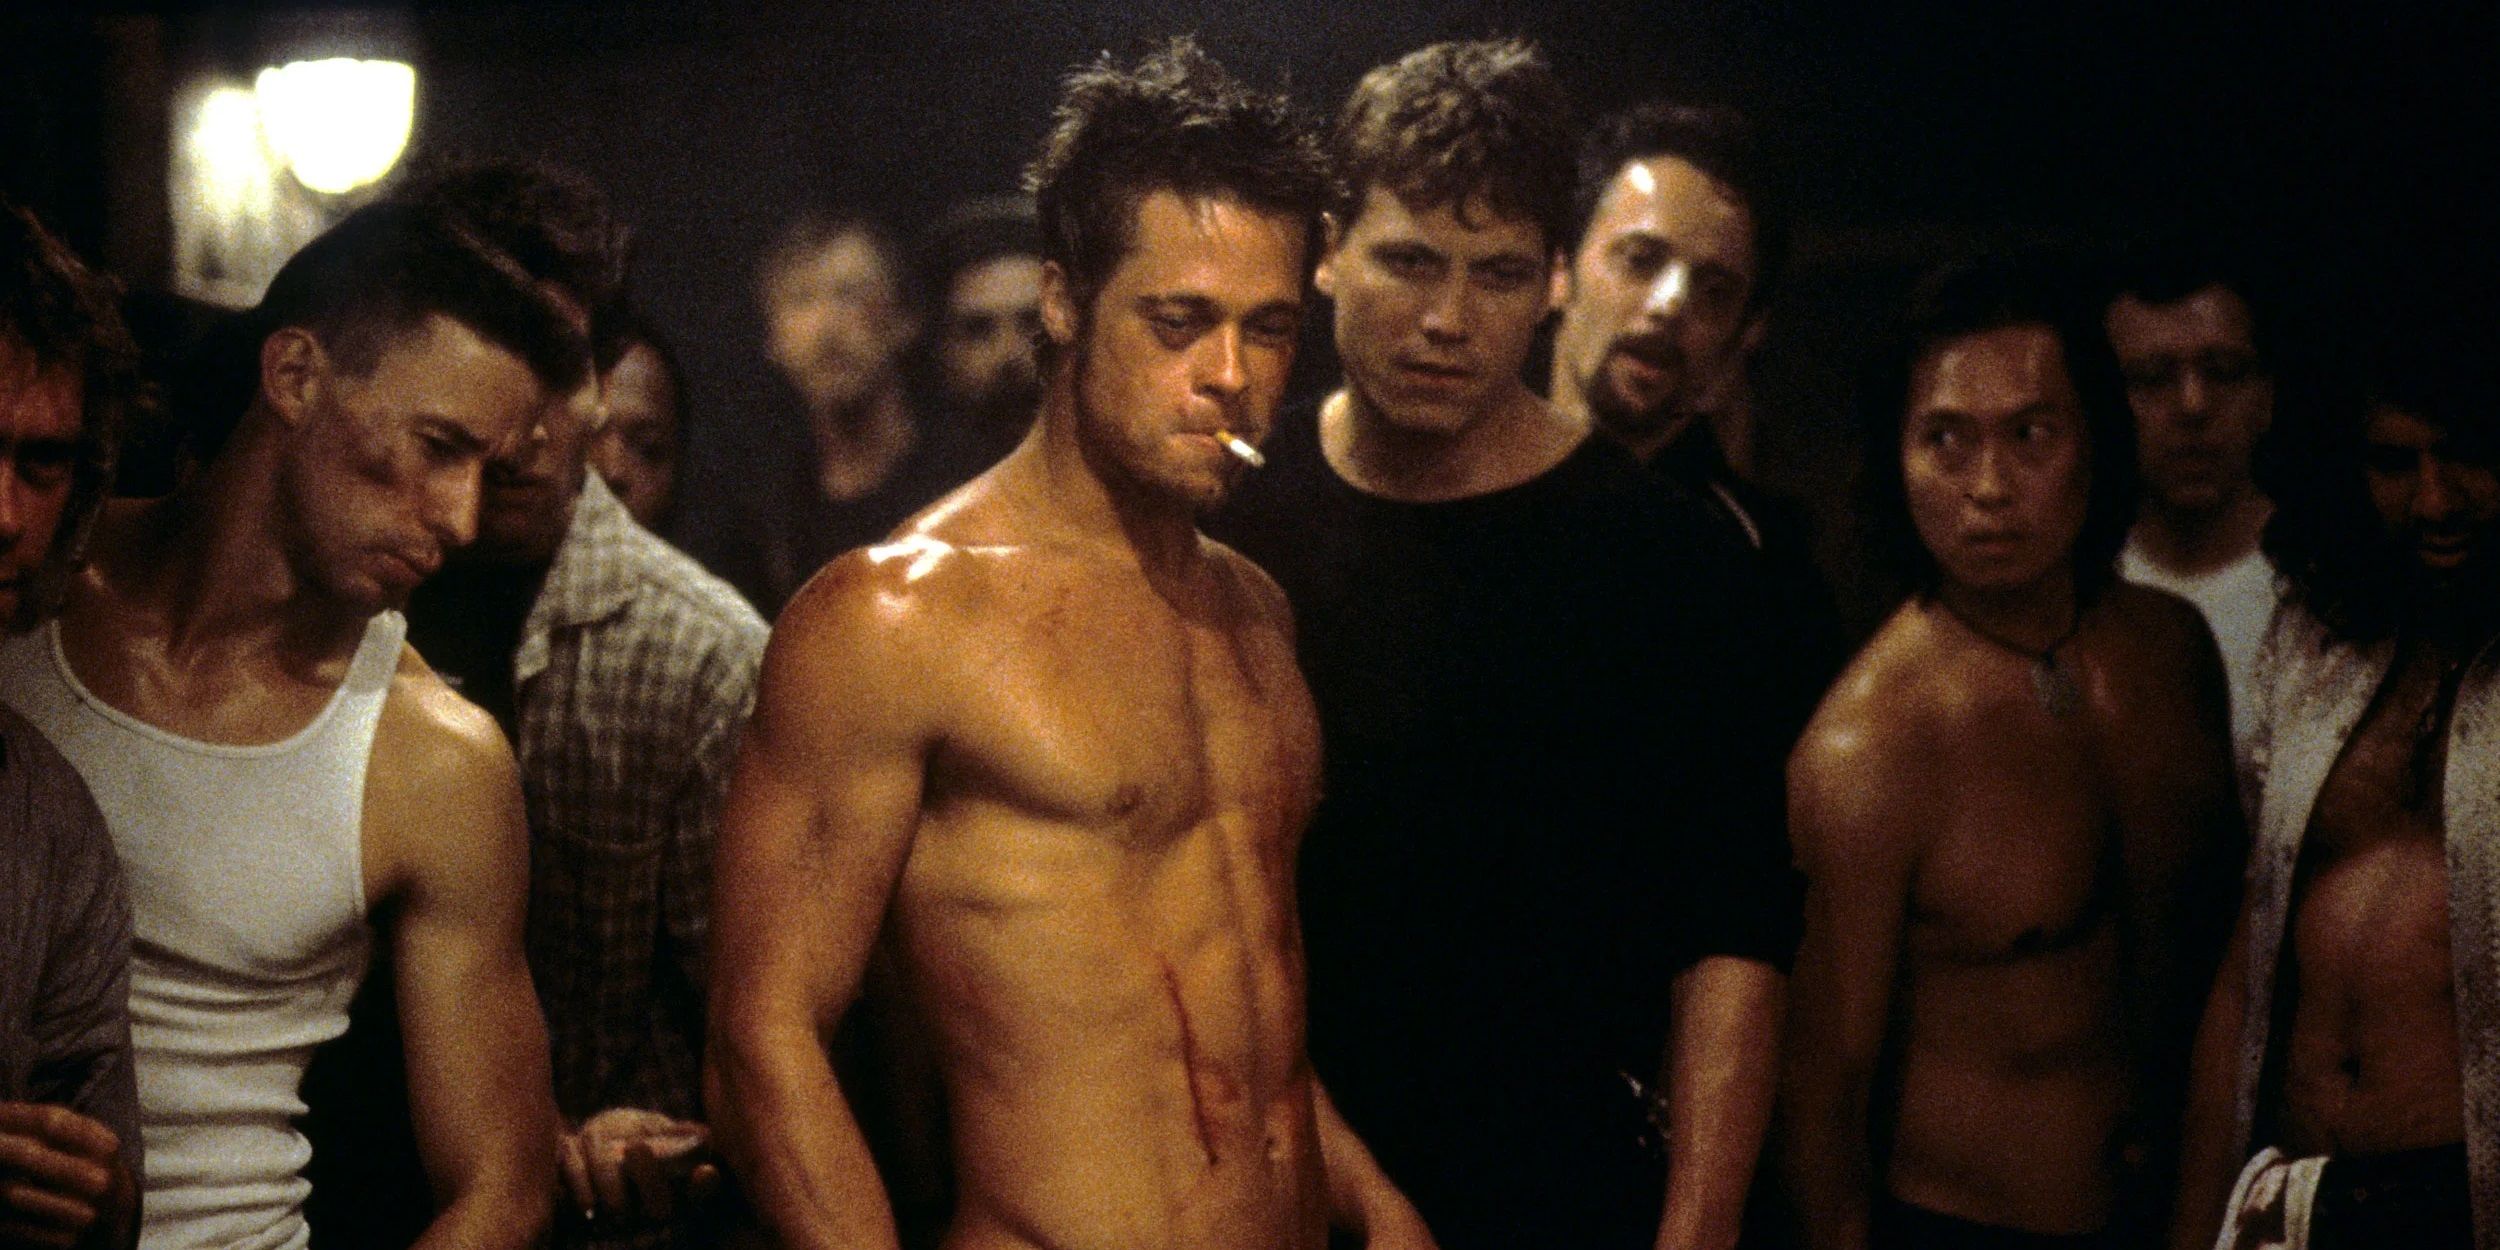 Brad Pitt shirtless surrounded by other fighters in Fight Club.